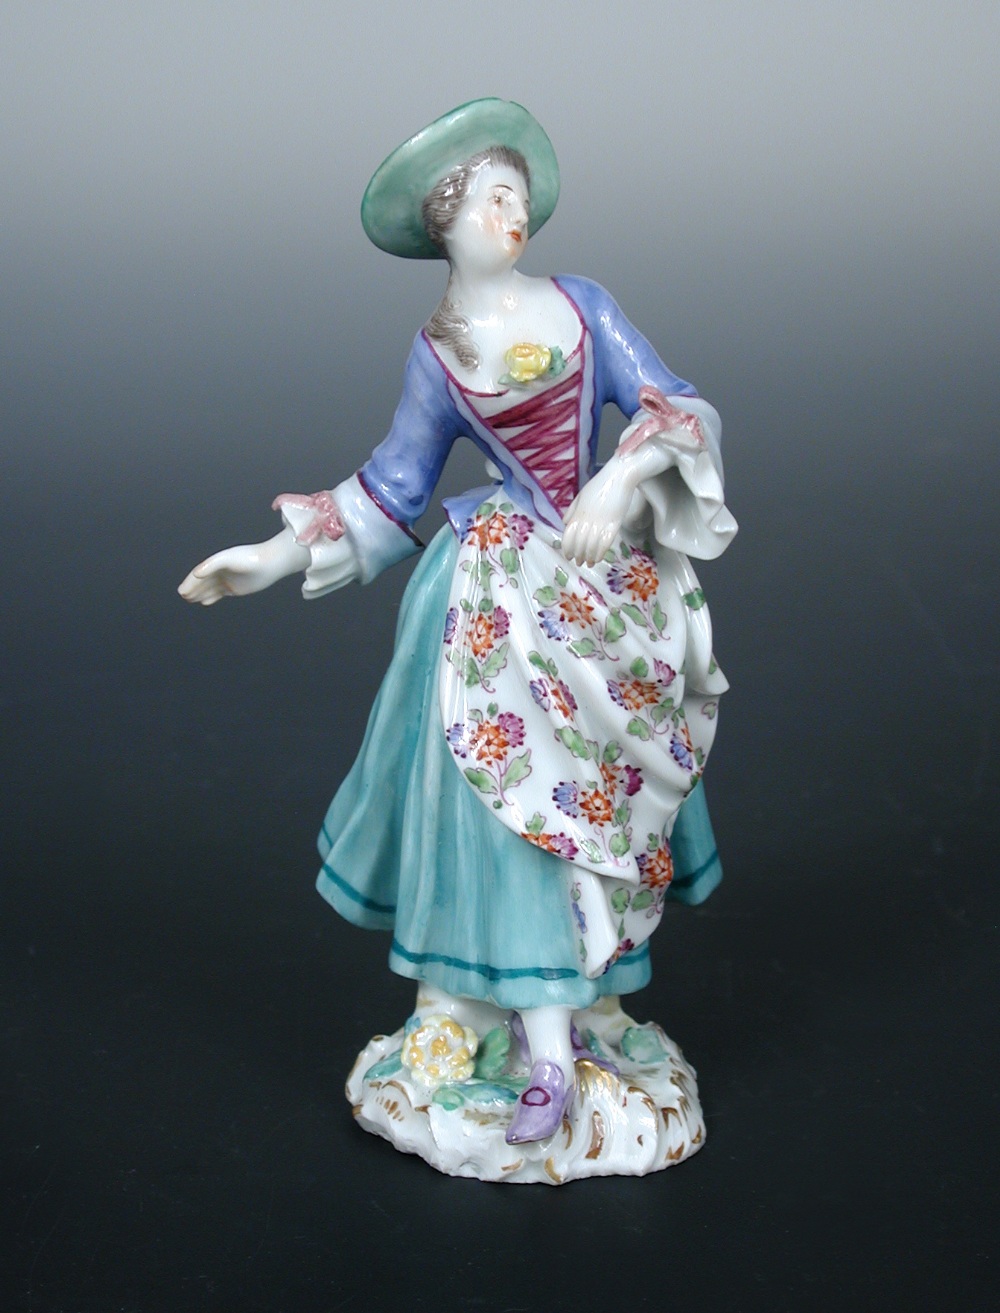 An 18th century Meissen figure of a lady, she wears a floral apron over her pale green dress, her